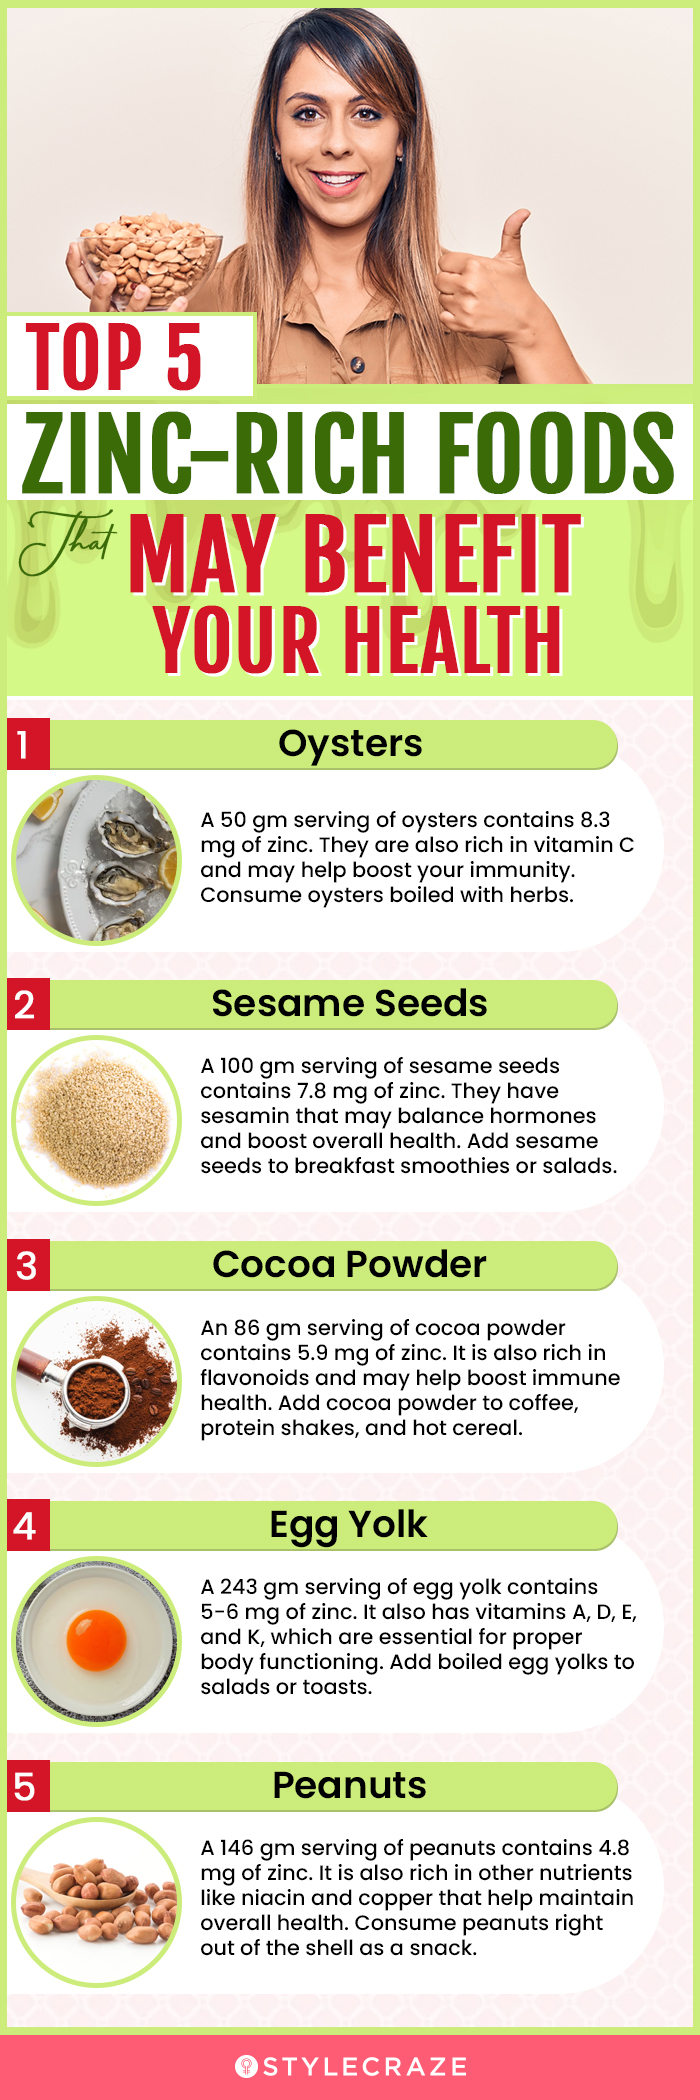 top 5 zinc-rich foods that may benefit your health (infographic)